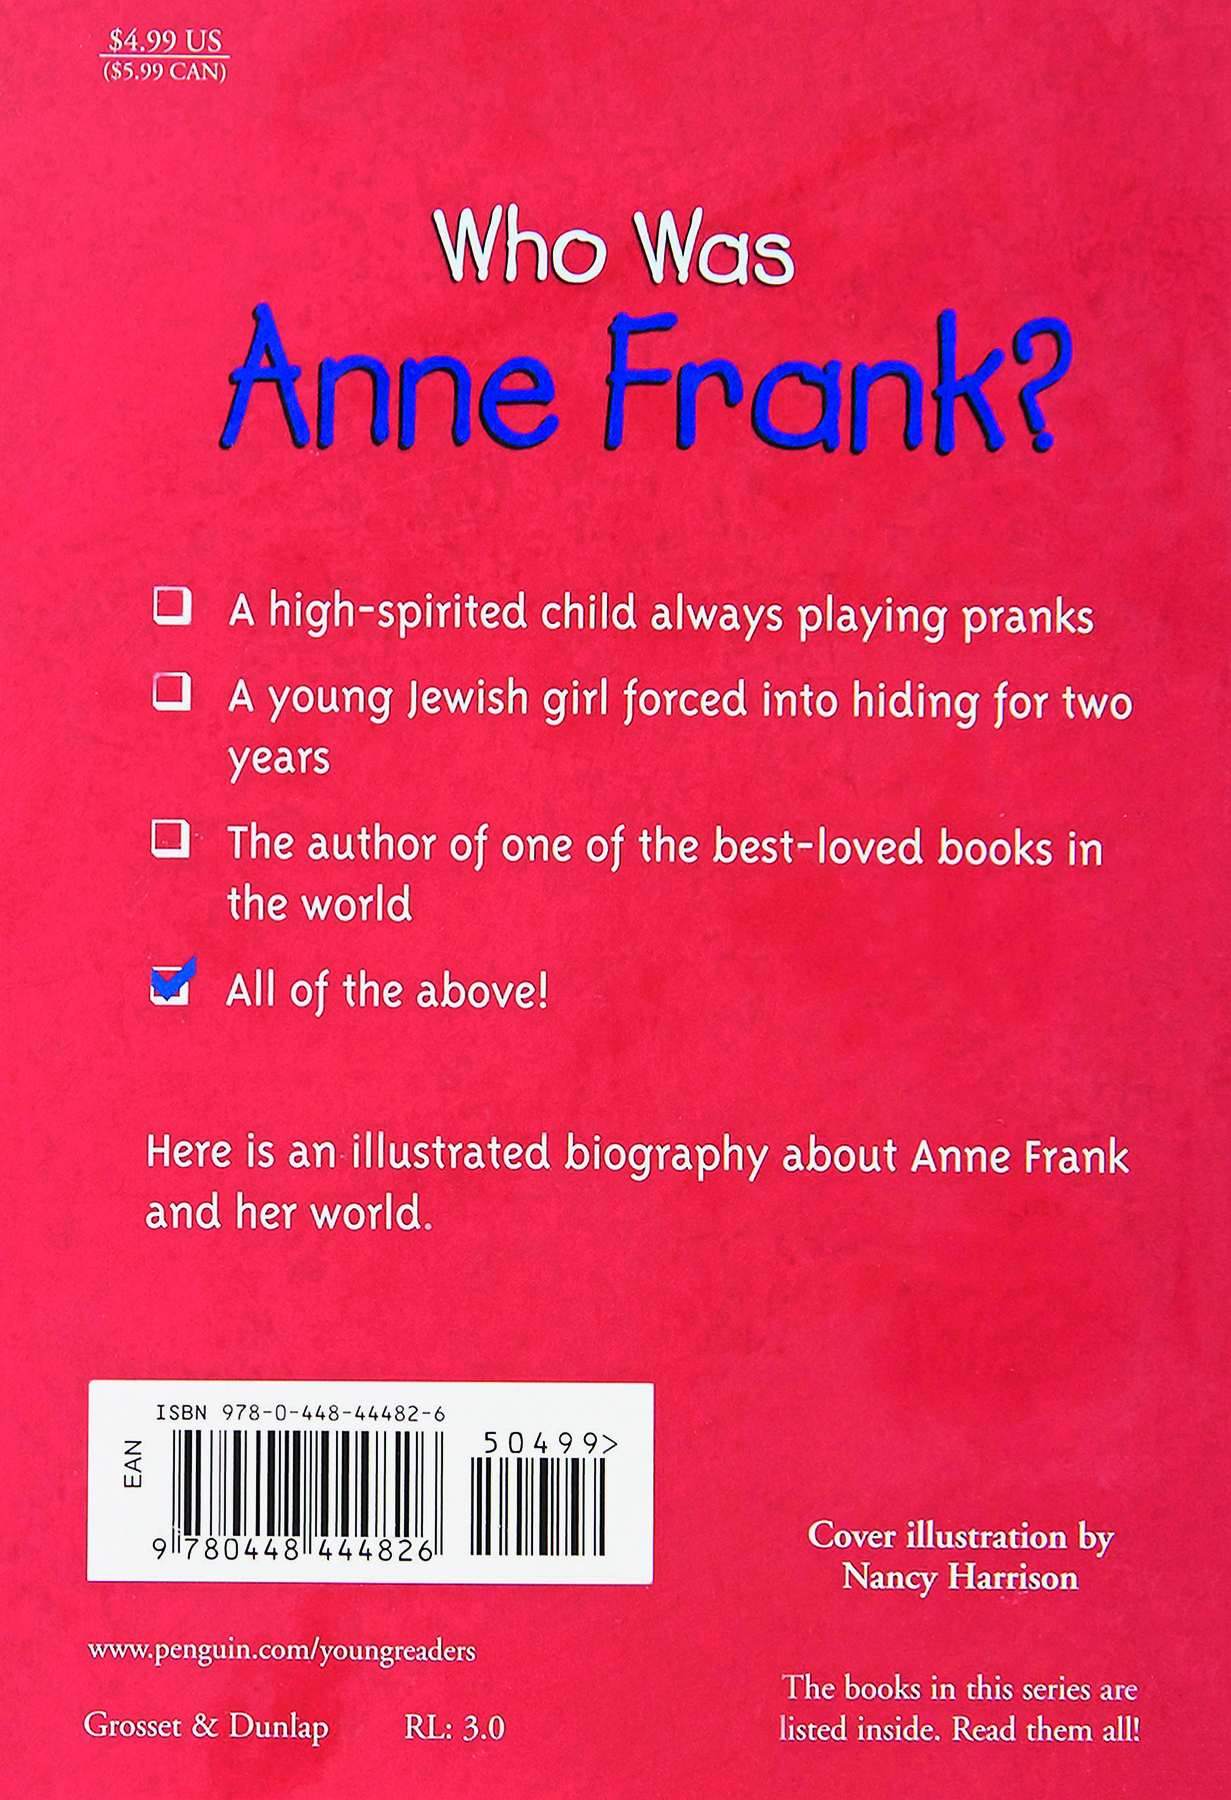 Quarta capa de livro. Na parte superior, lê-se o título: WHO WAS ANNE FRANK? Abaixo, há uma lista com alguns itens: A high-spirited child always playing pranks. A young Jewish girl forced into hiding for two years. The author of one of the best-loved books in the world. All of the above!  Este último item está ticado. Here is an illustrated biography about Anne Frank and her world.